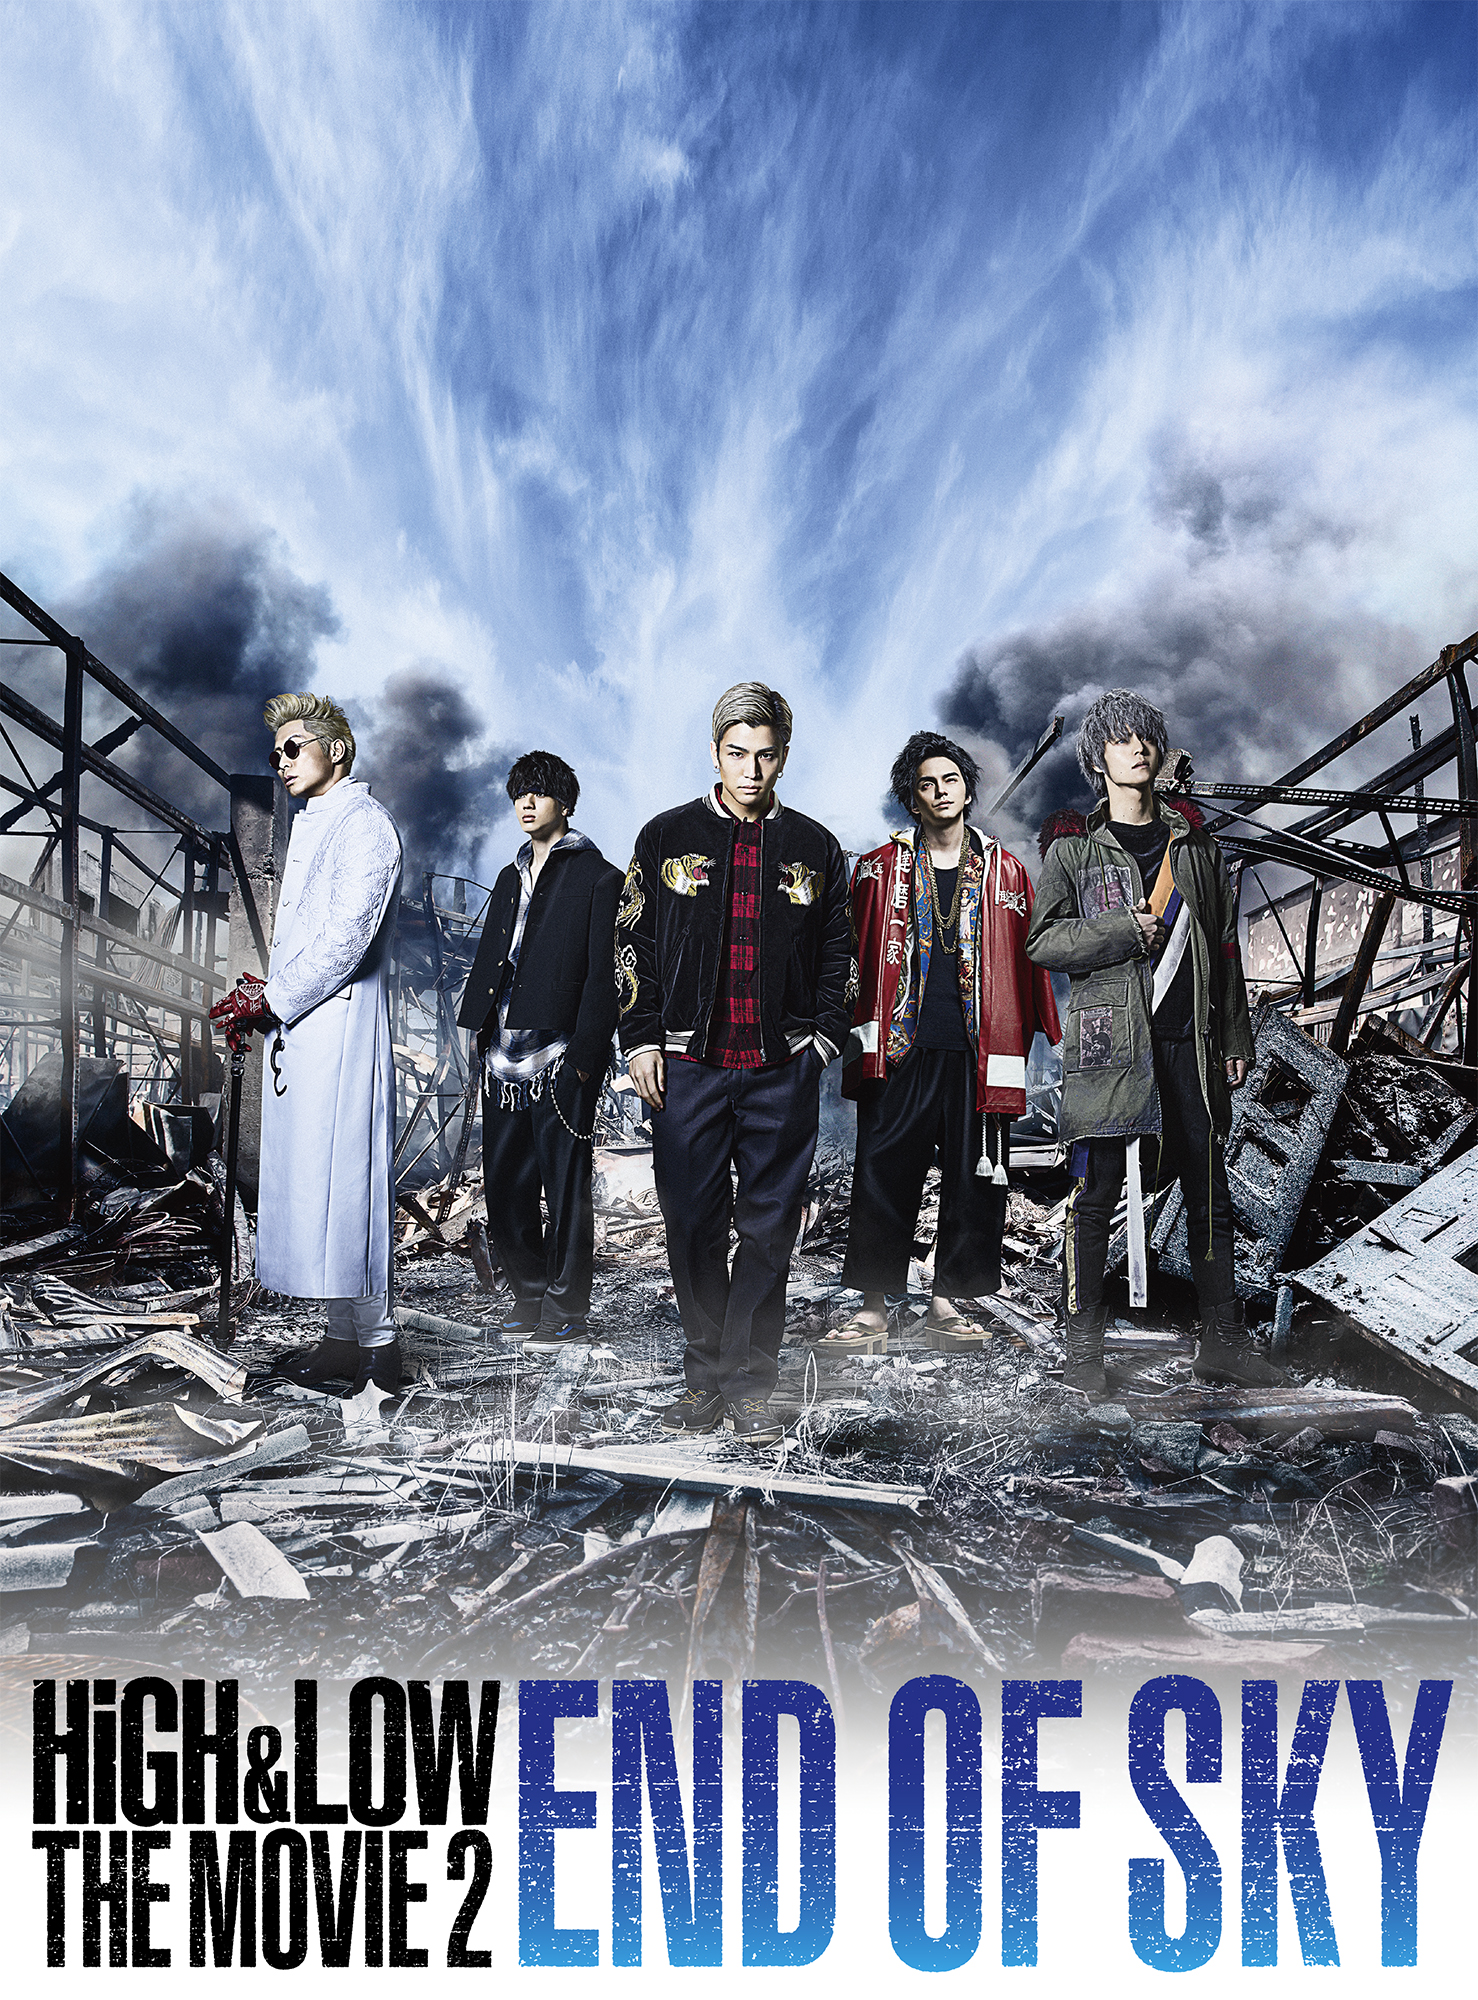 HiGH & LOW THE MOVIE 2 / END OF SKY